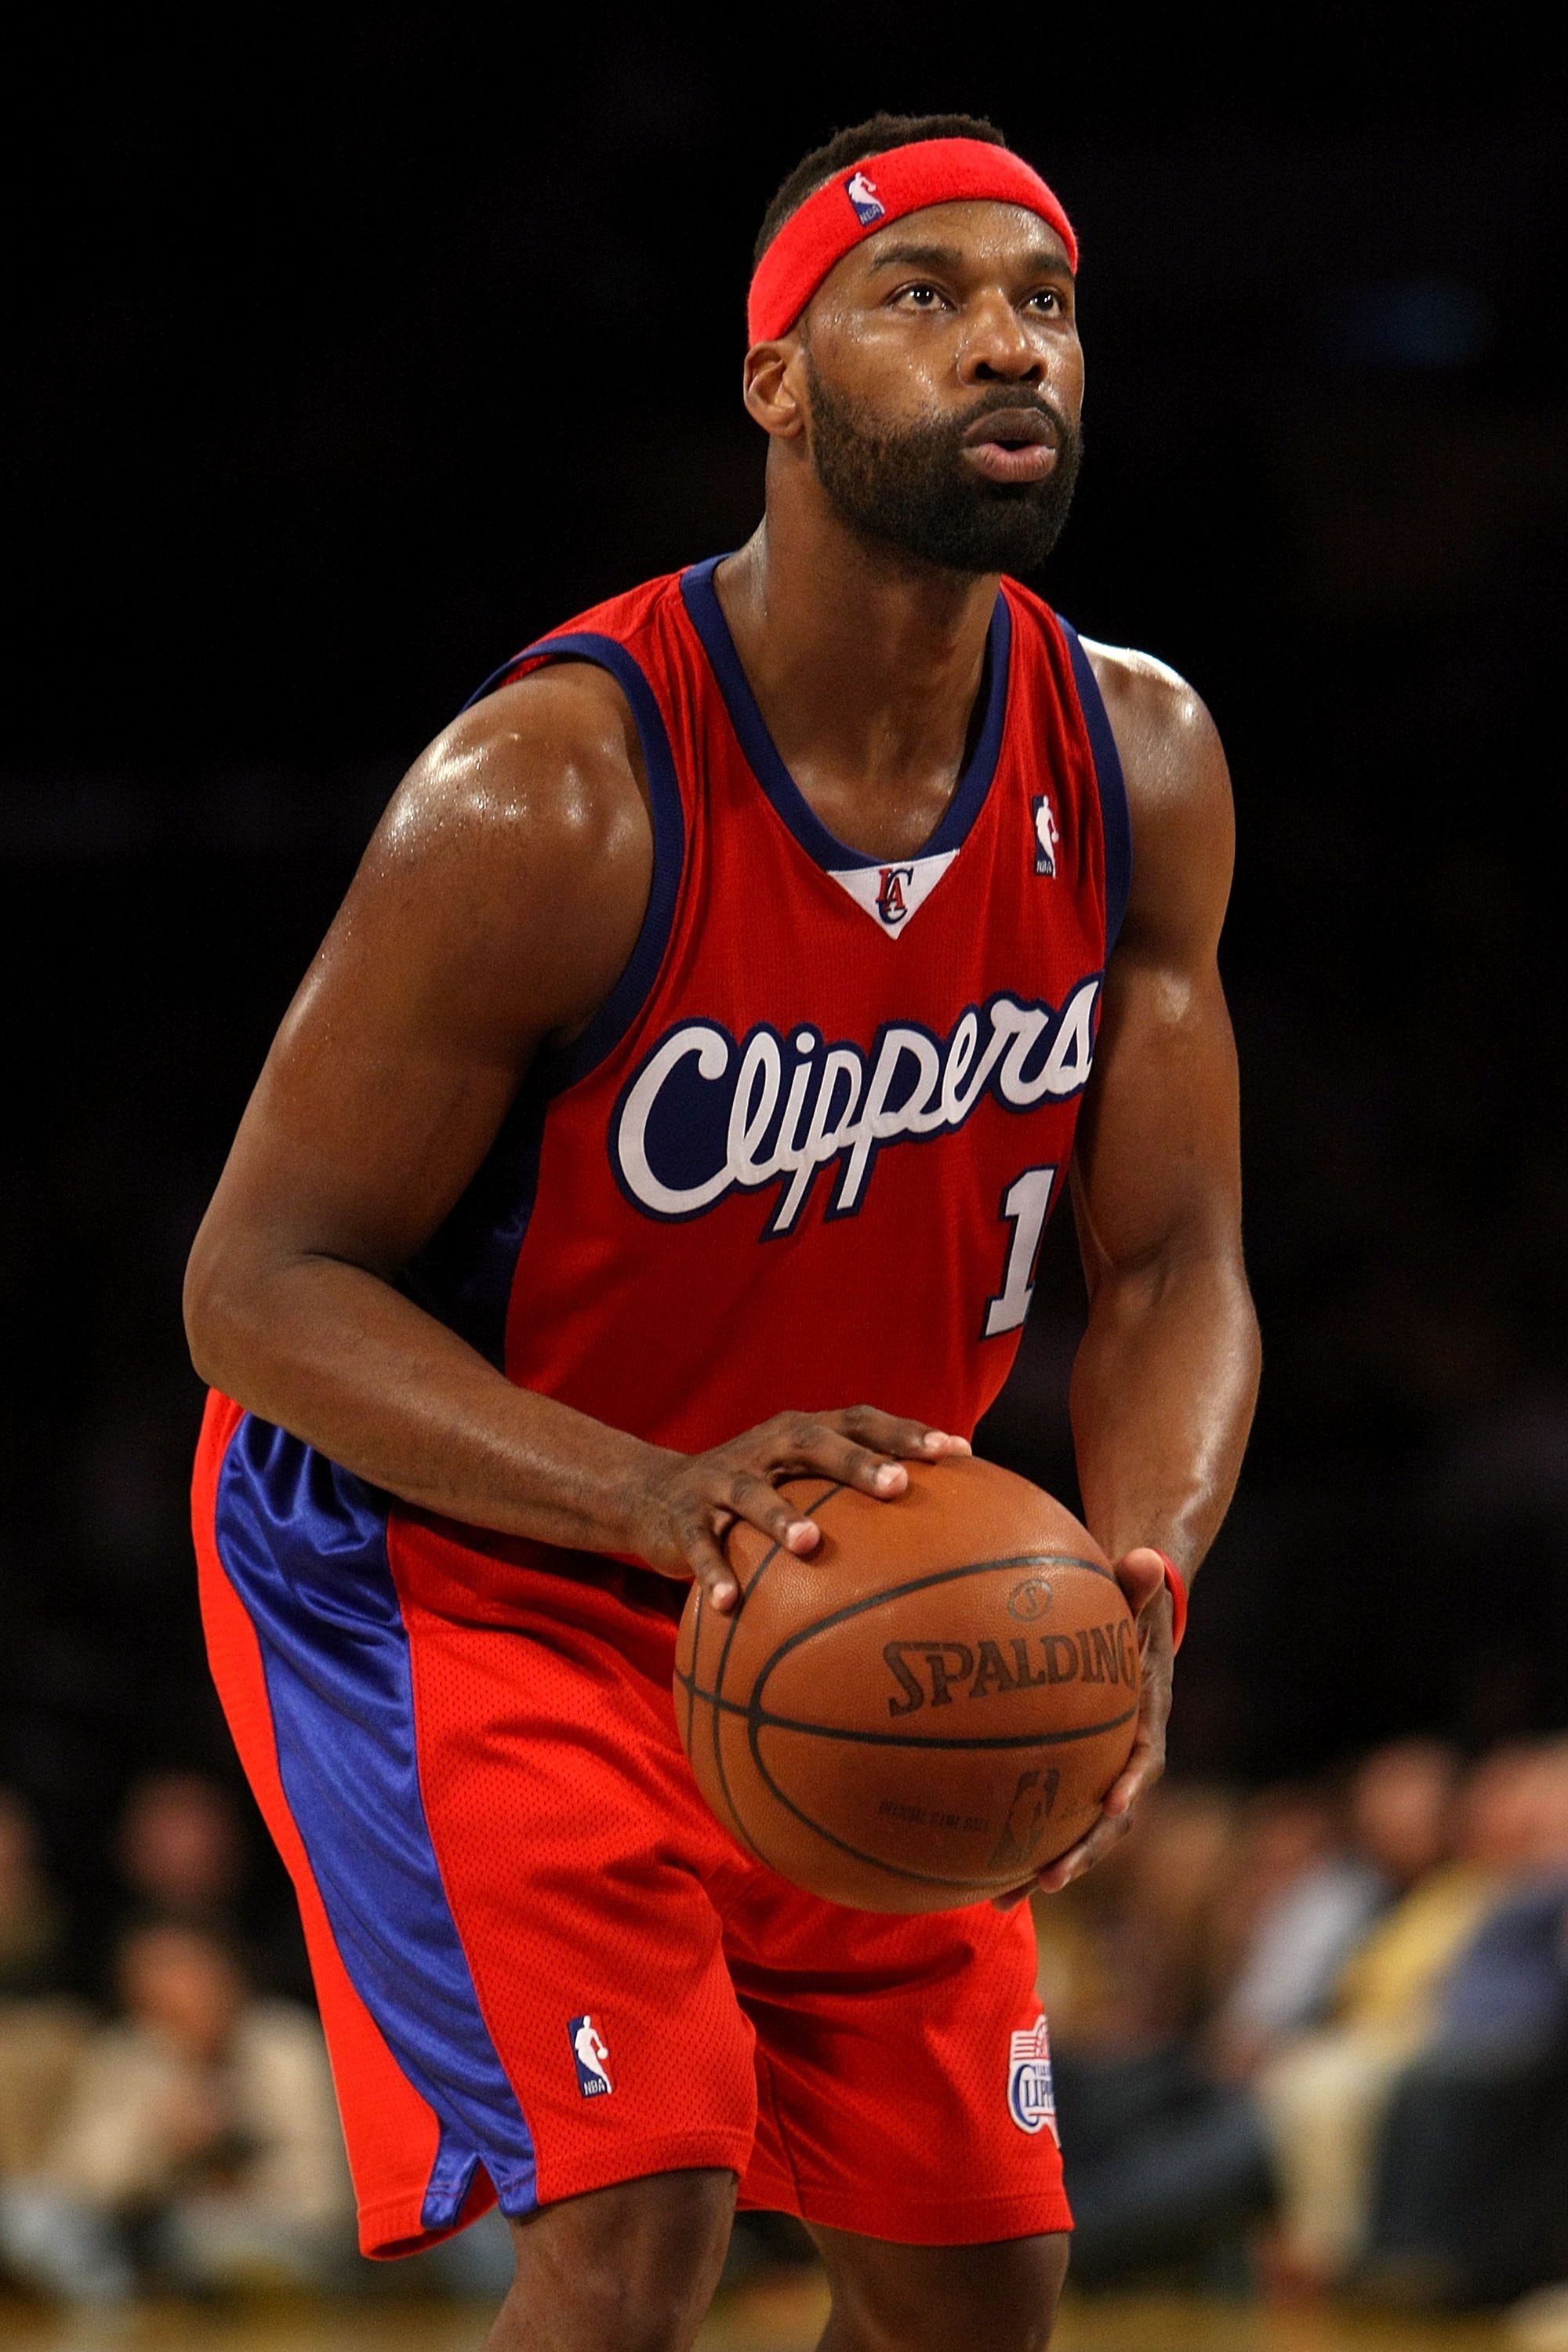 LOS ANGELES, CA - JANUARY 15:  Baron Davis #1 of the Los Angeles Clippers shoots a free throw against the Los Angeles Lakers during the game on January 15, 2010 at Staples Center in Los Angeles, California. The Lakers won 126-86. NOTE TO USER: User expres